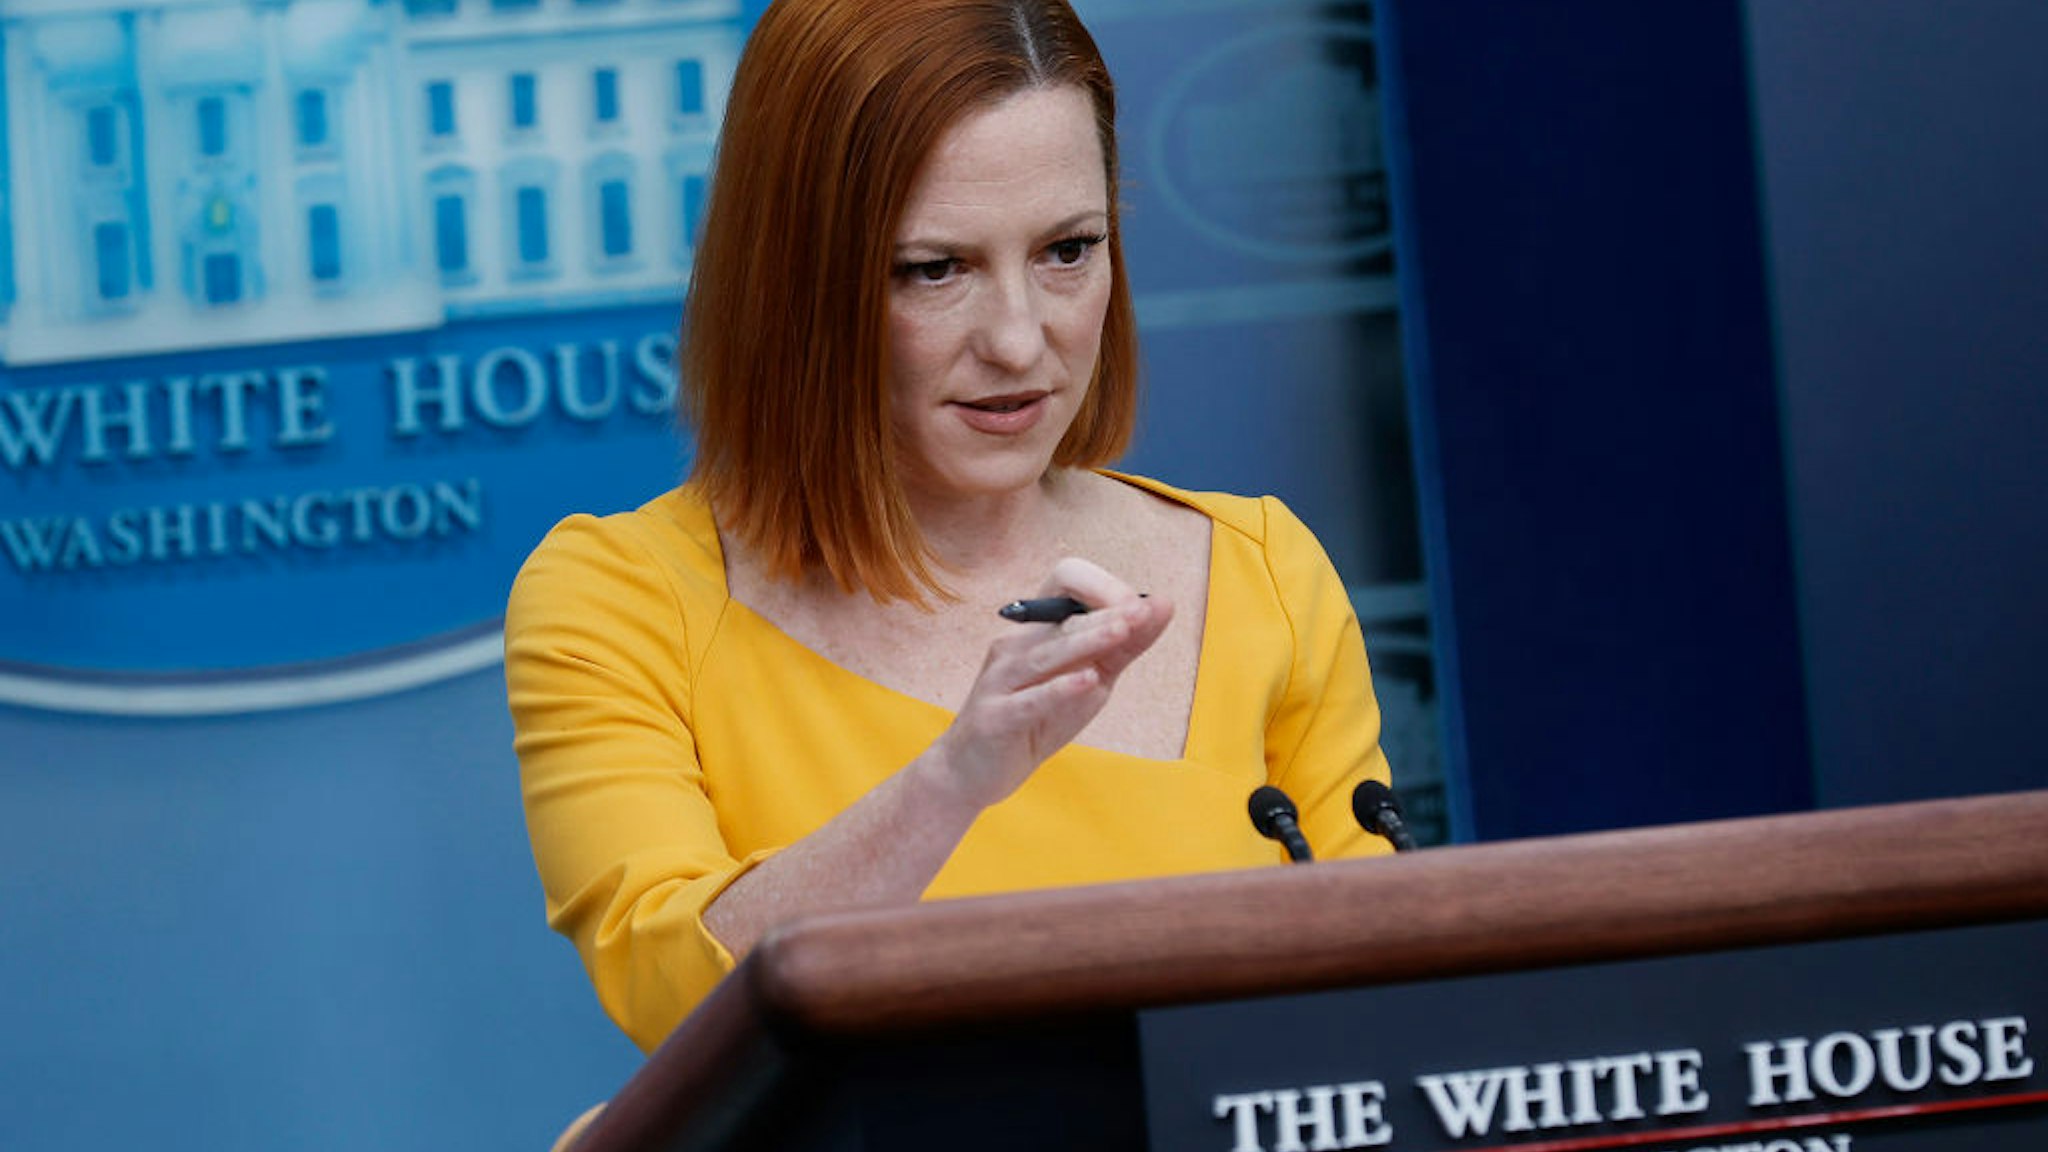 WASHINGTON, DC - MARCH 15: White House Press Secretary Jen Psaki talks to reporters during the daily news conference in the Brady Press Briefing Room at the White House on March 15, 2022 in Washington, DC. Psaki fielded questions about the U.S. support for Ukraine in the face of invasion by Russia and other topics. (Photo by Chip Somodevilla/Getty Images)